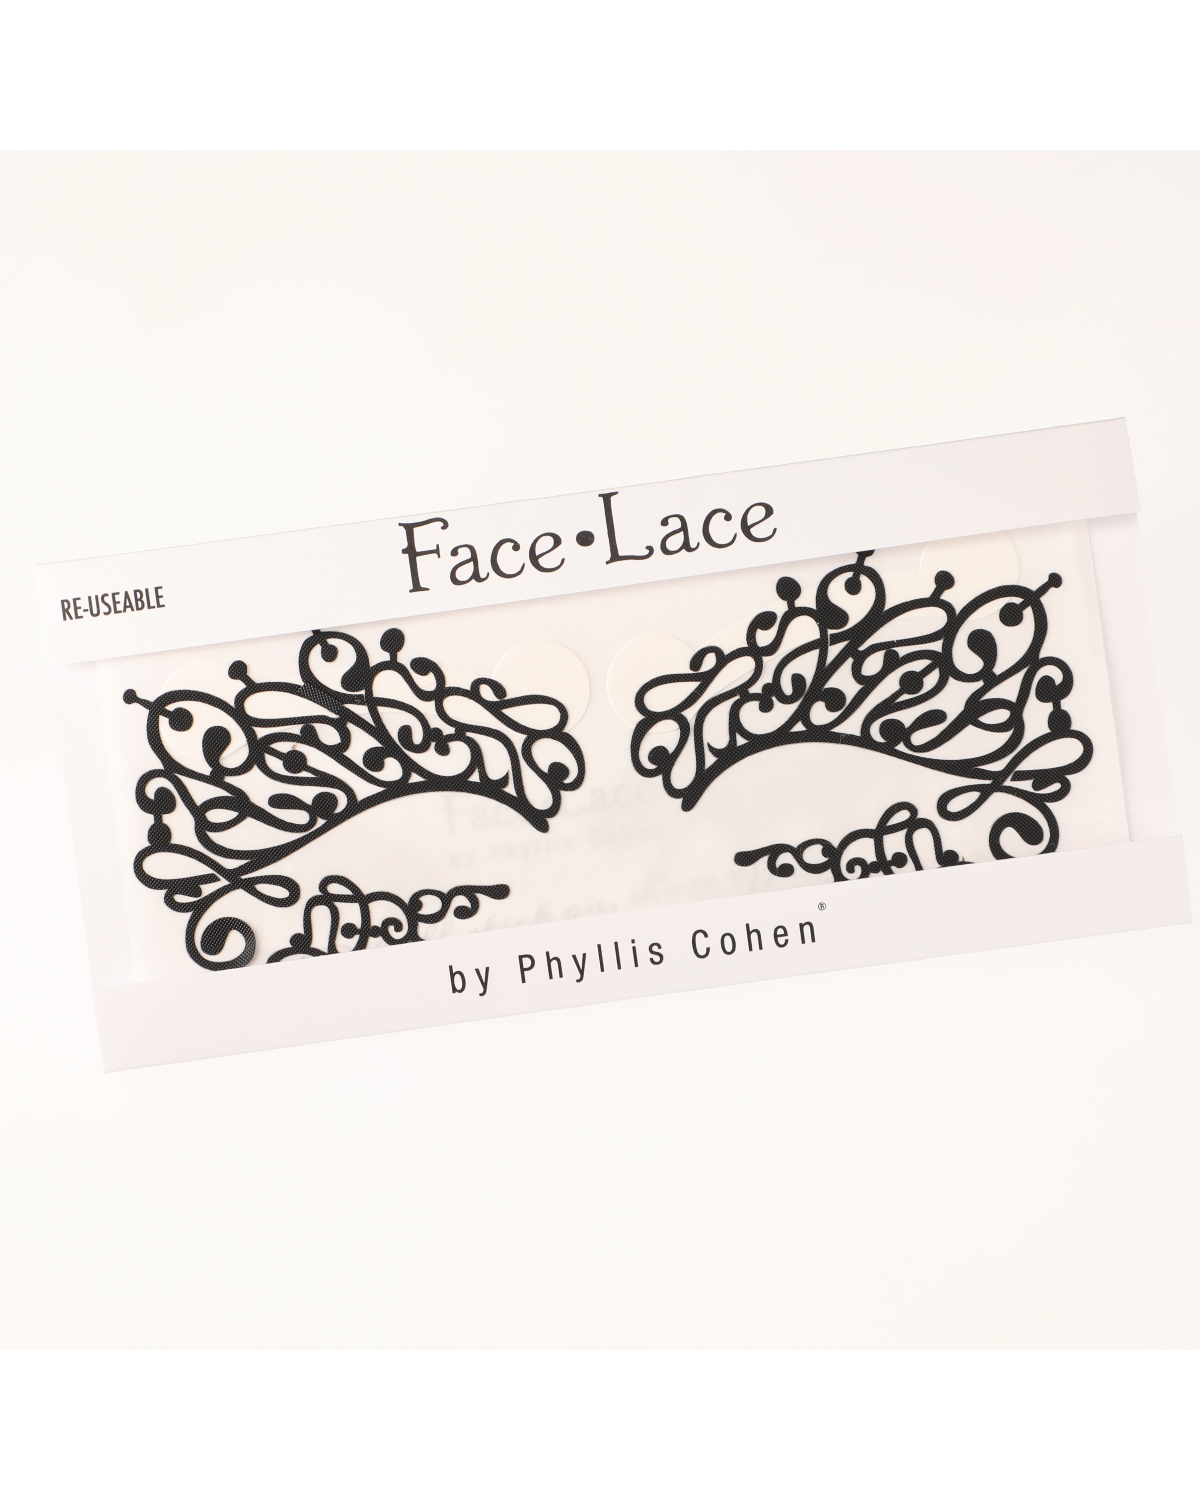 Swirlyqueue / Face Lace by Phyllis Cohen